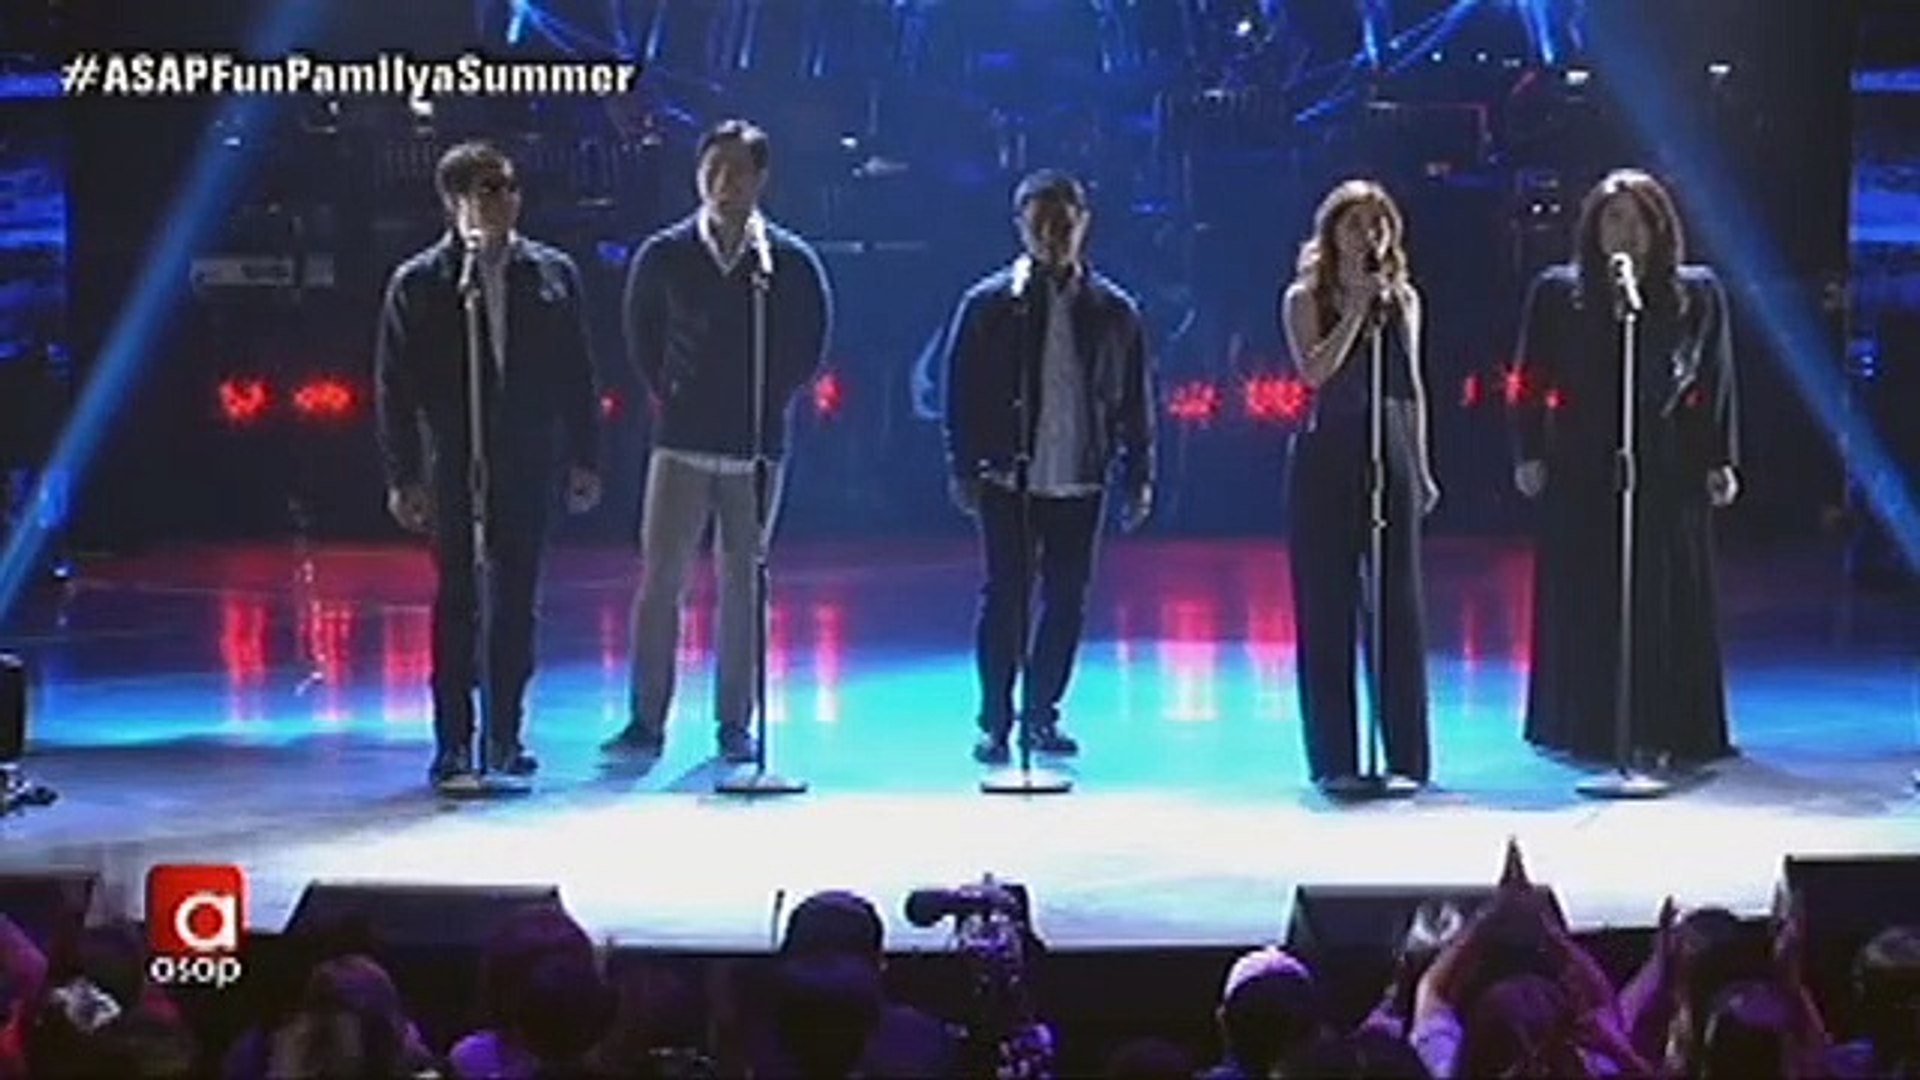 ⁣OPM Hitmakers Ogie, Randy, Piolo, Kyla and Joanne Lorenzana in a throwback OPM performance